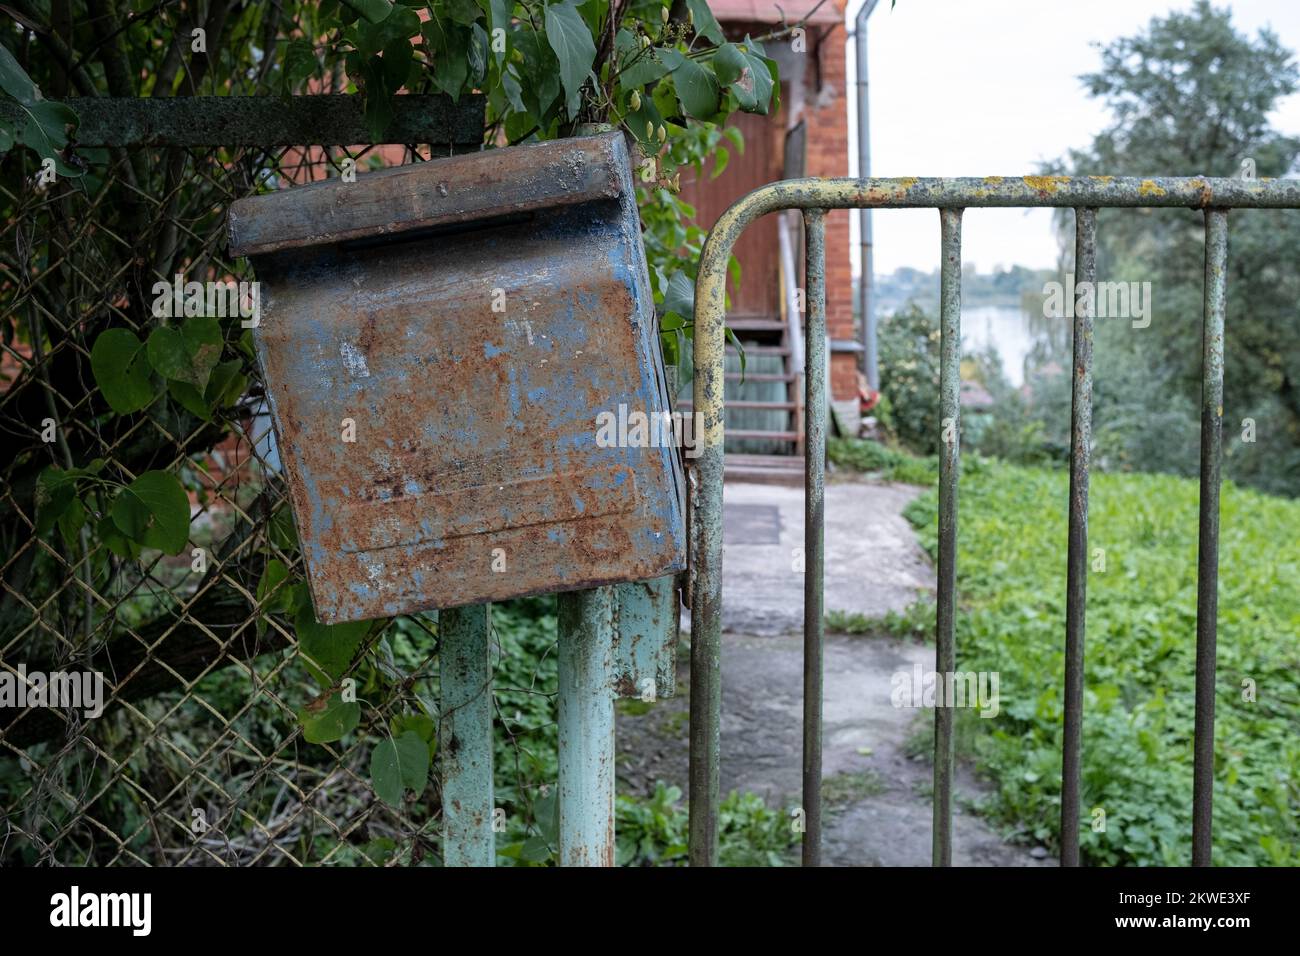 Mailbox is hanging on the fence. Old, rusty mailbox with peeling paint. Stock Photo